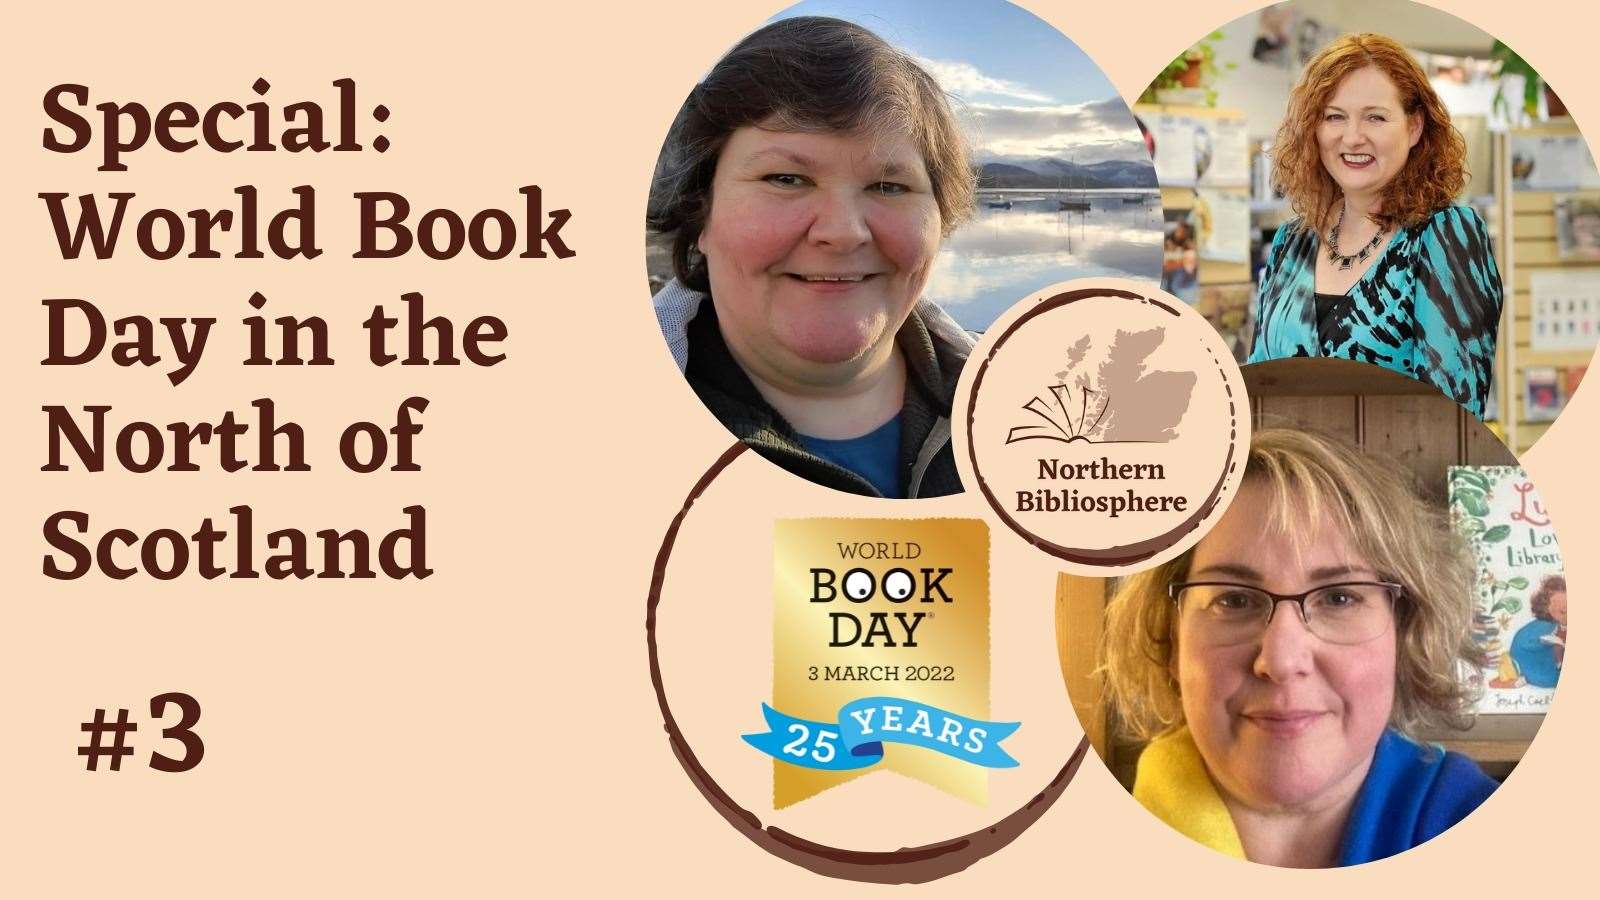 Listen to the latest episode of Northern Bibliosphere to discover more about World Book Day 2022 celebrations in the North of Scotland.